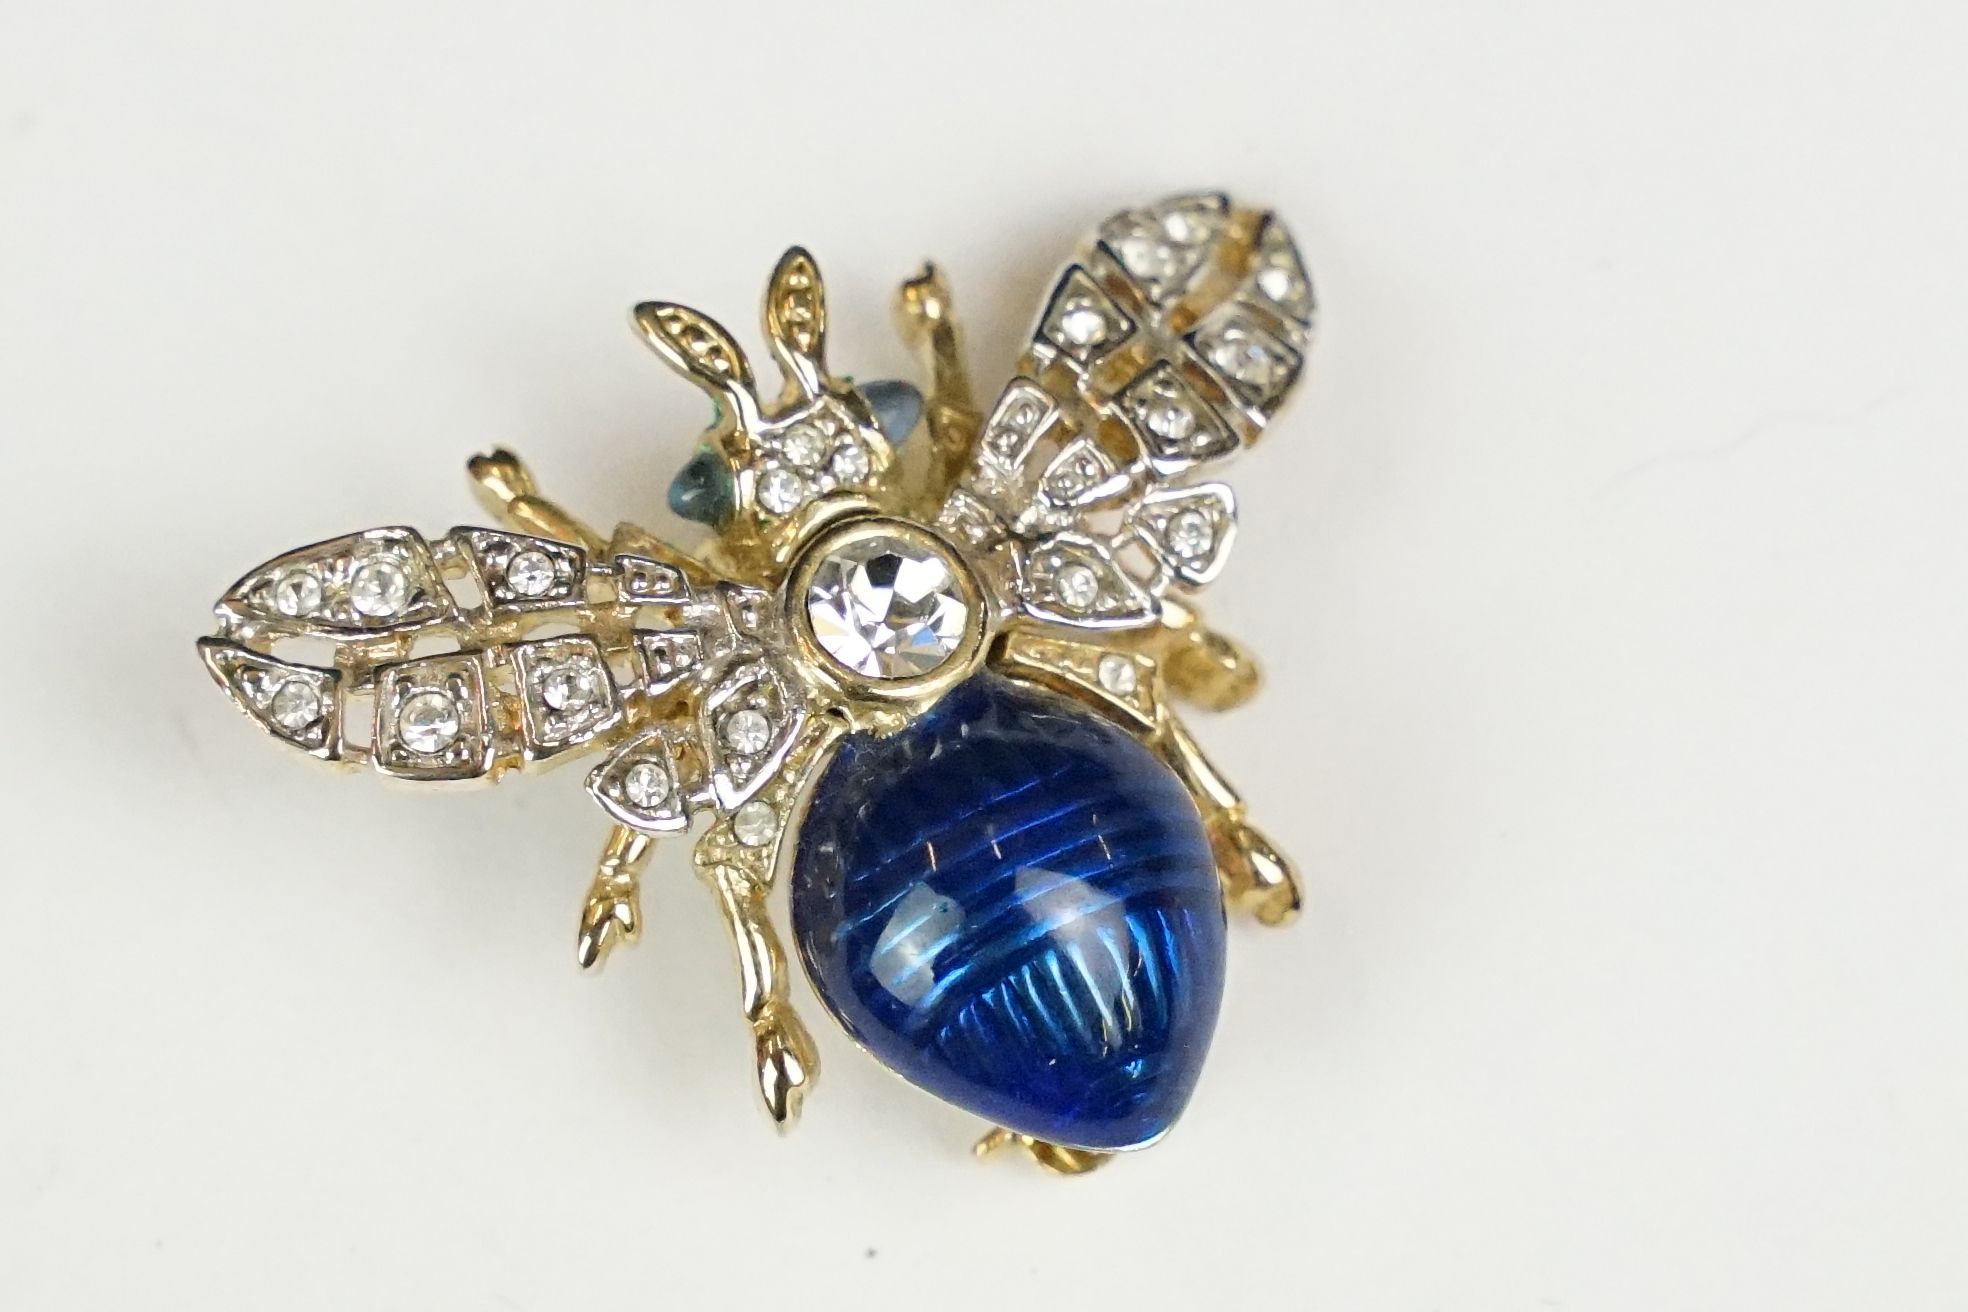 Gilt bee brooch with diamonte and glass body and eyes